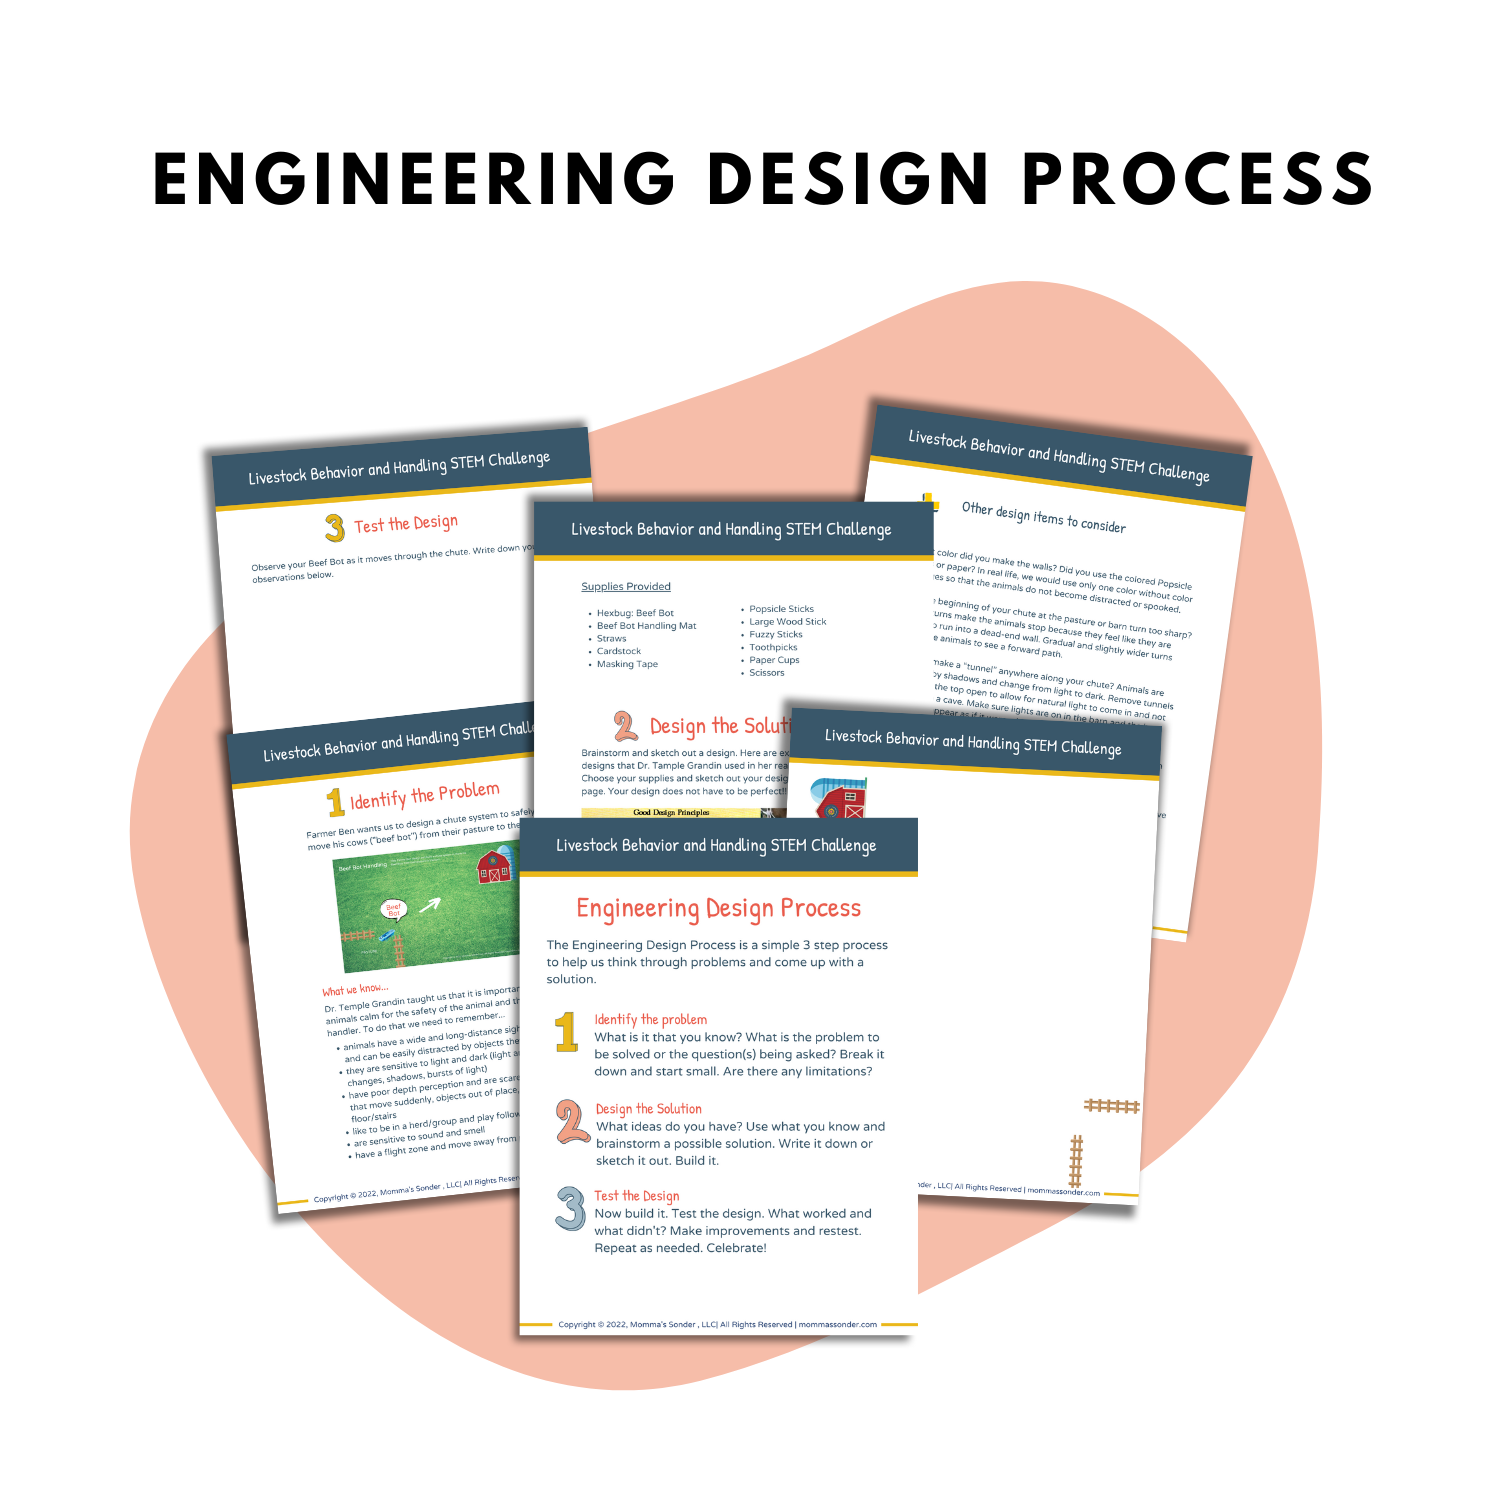 engineering design process pages from livestock handling and behavior STEM activity